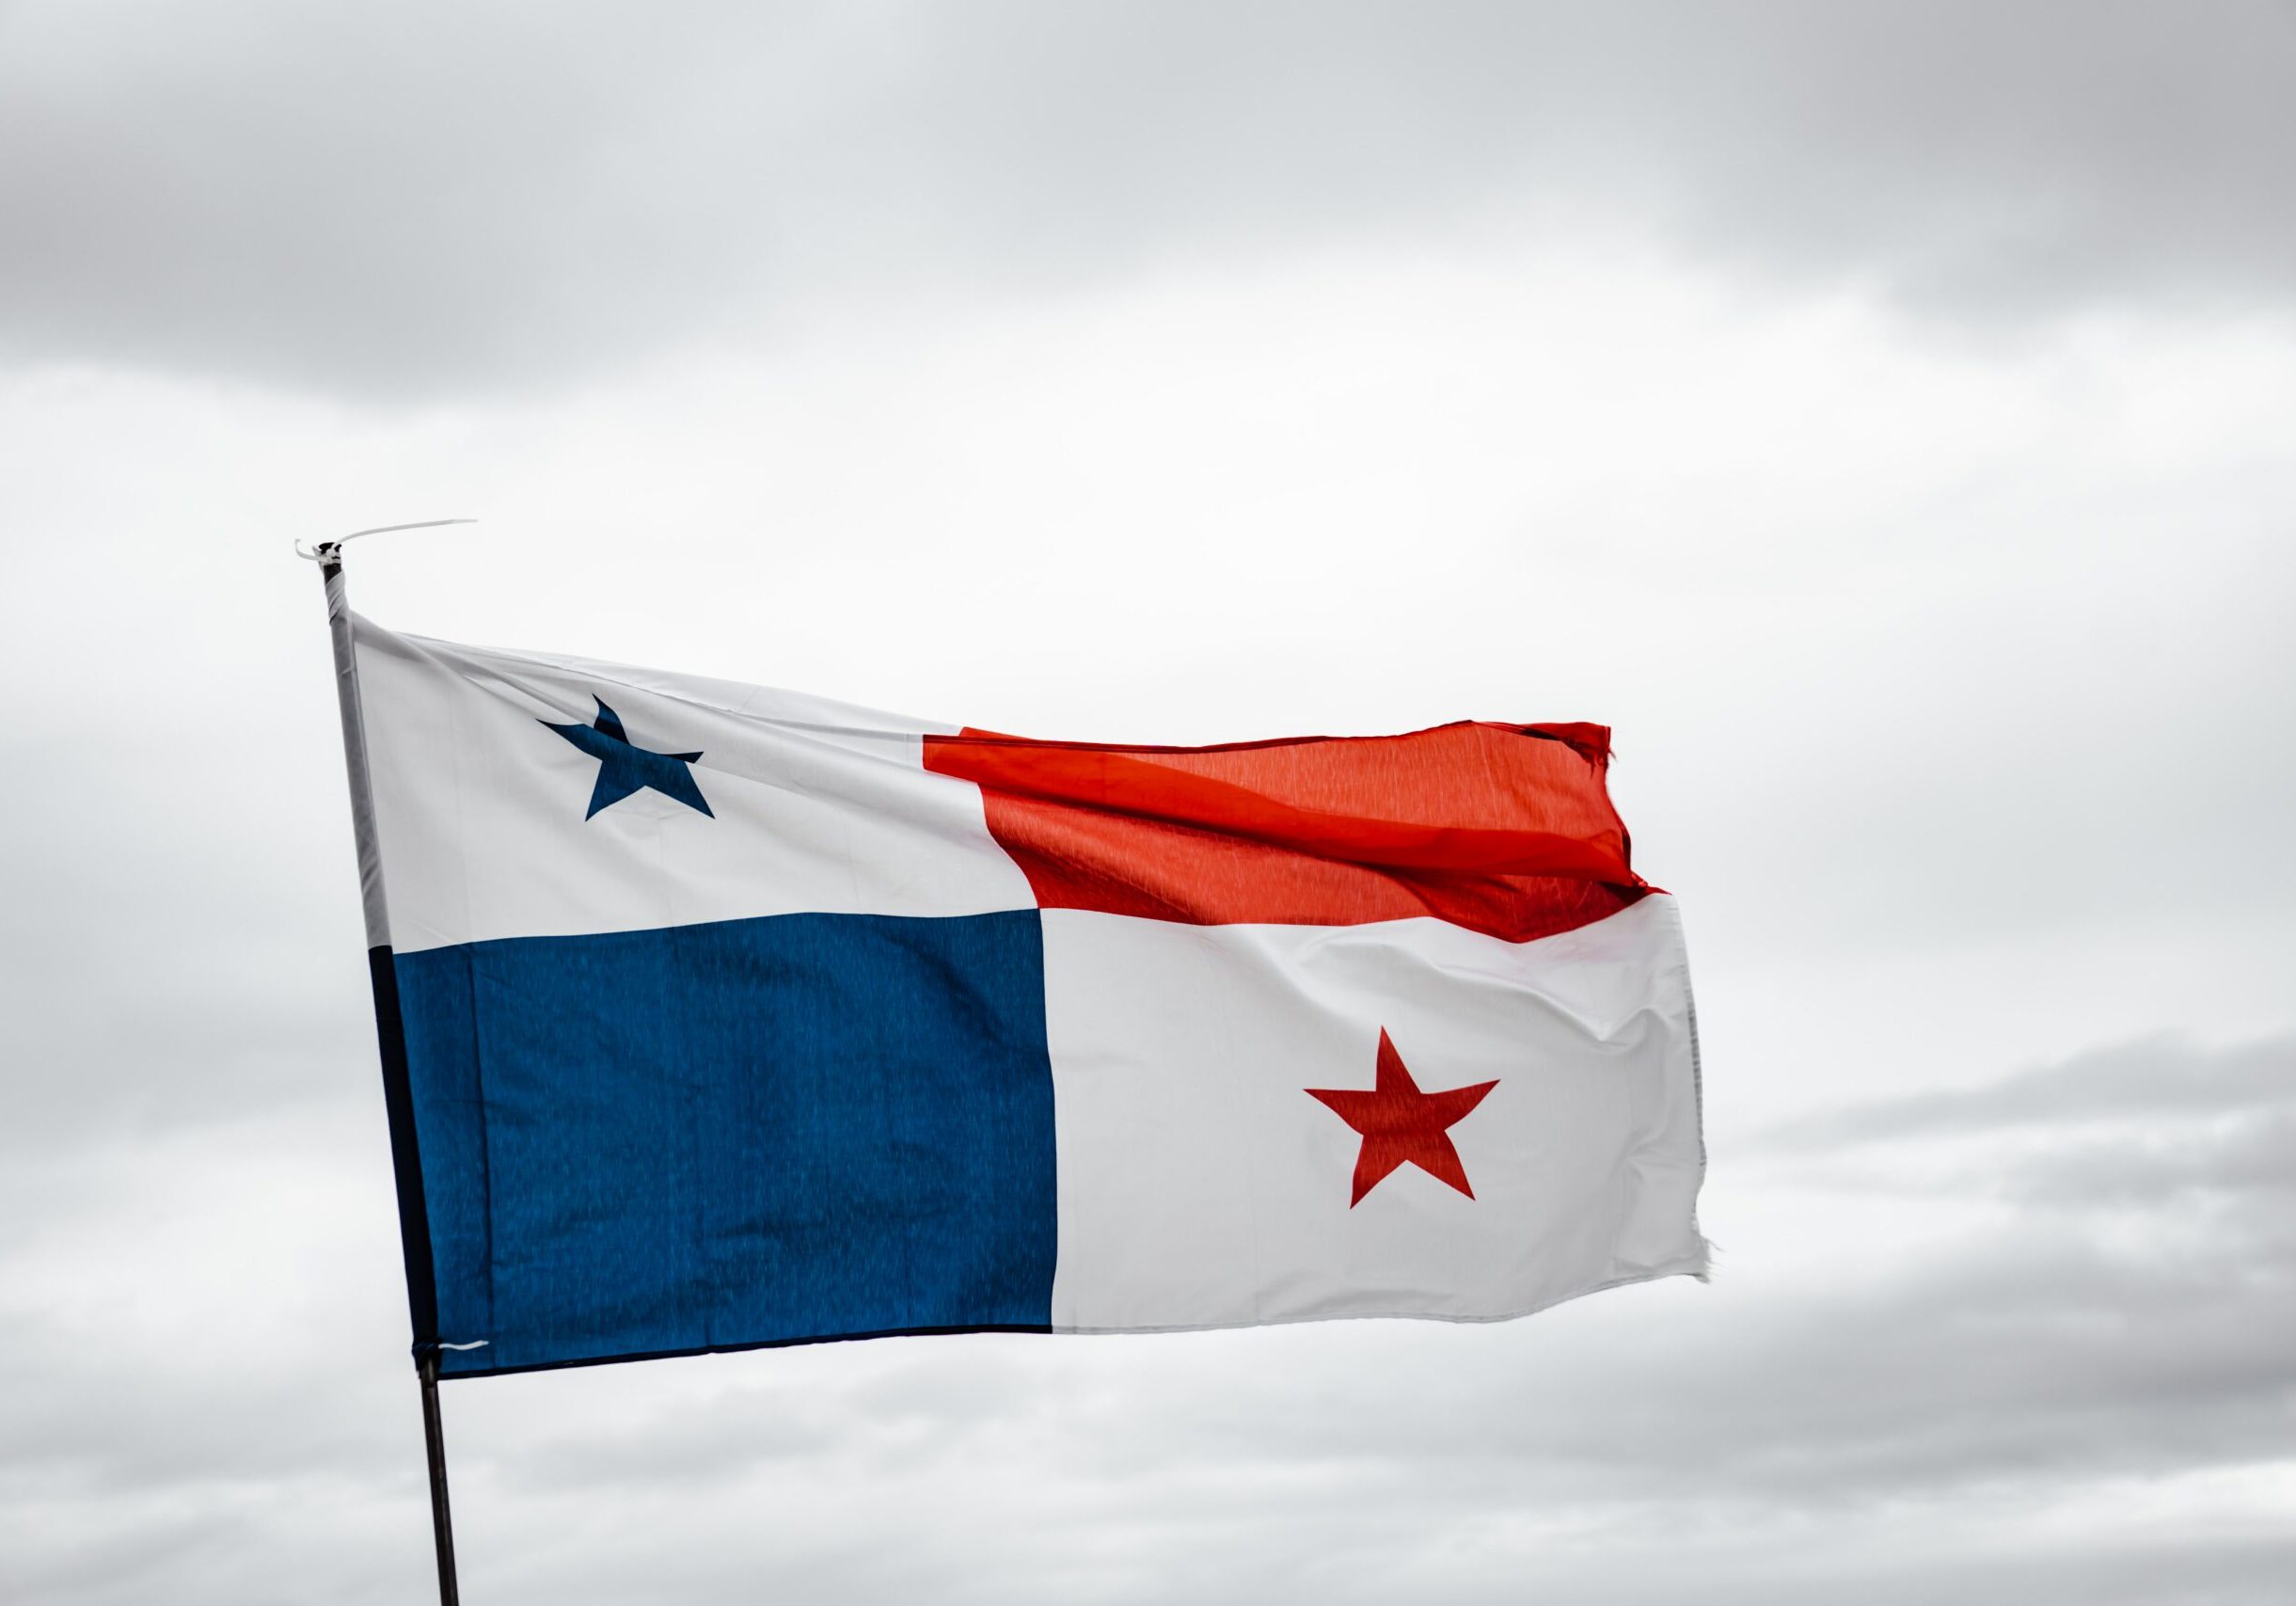 A Panama flag flying on a cloudy day